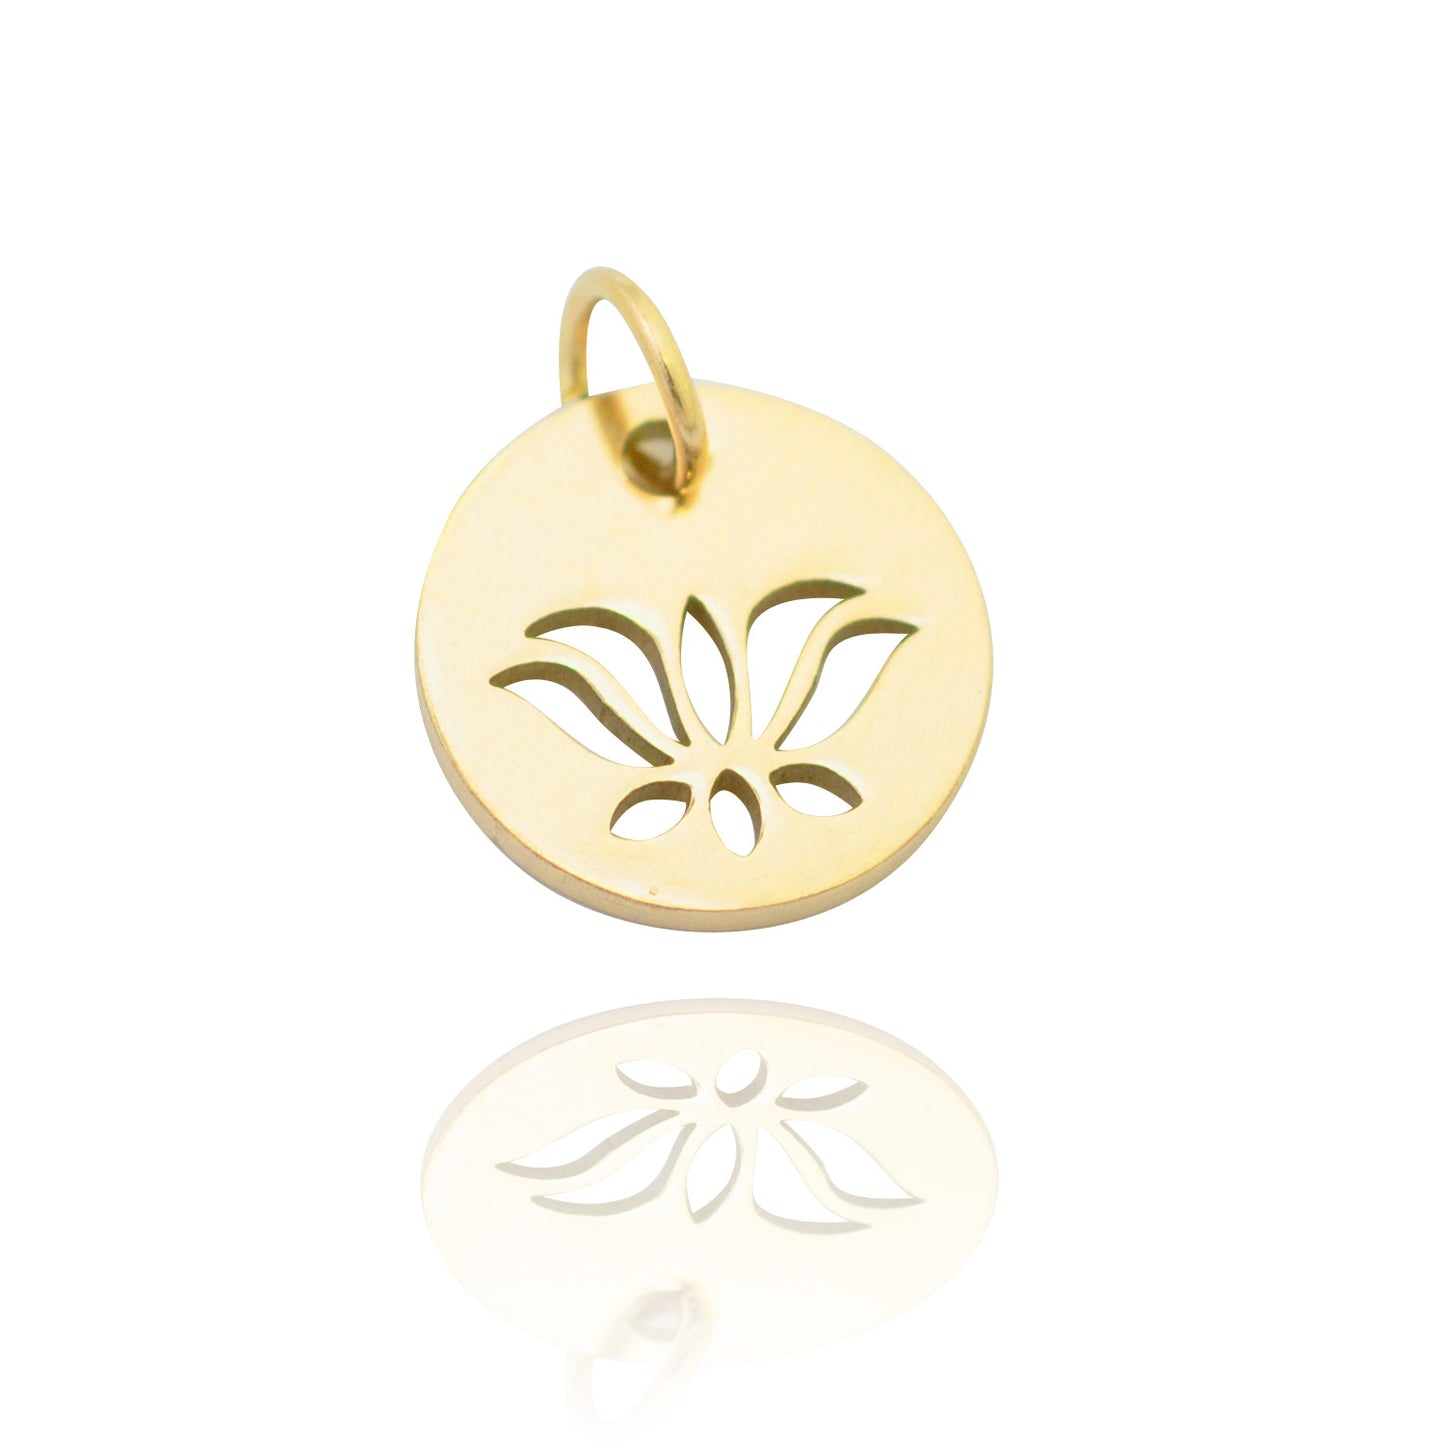 Gold-plated stainless steel pendant / lotus blossom / 12 mm